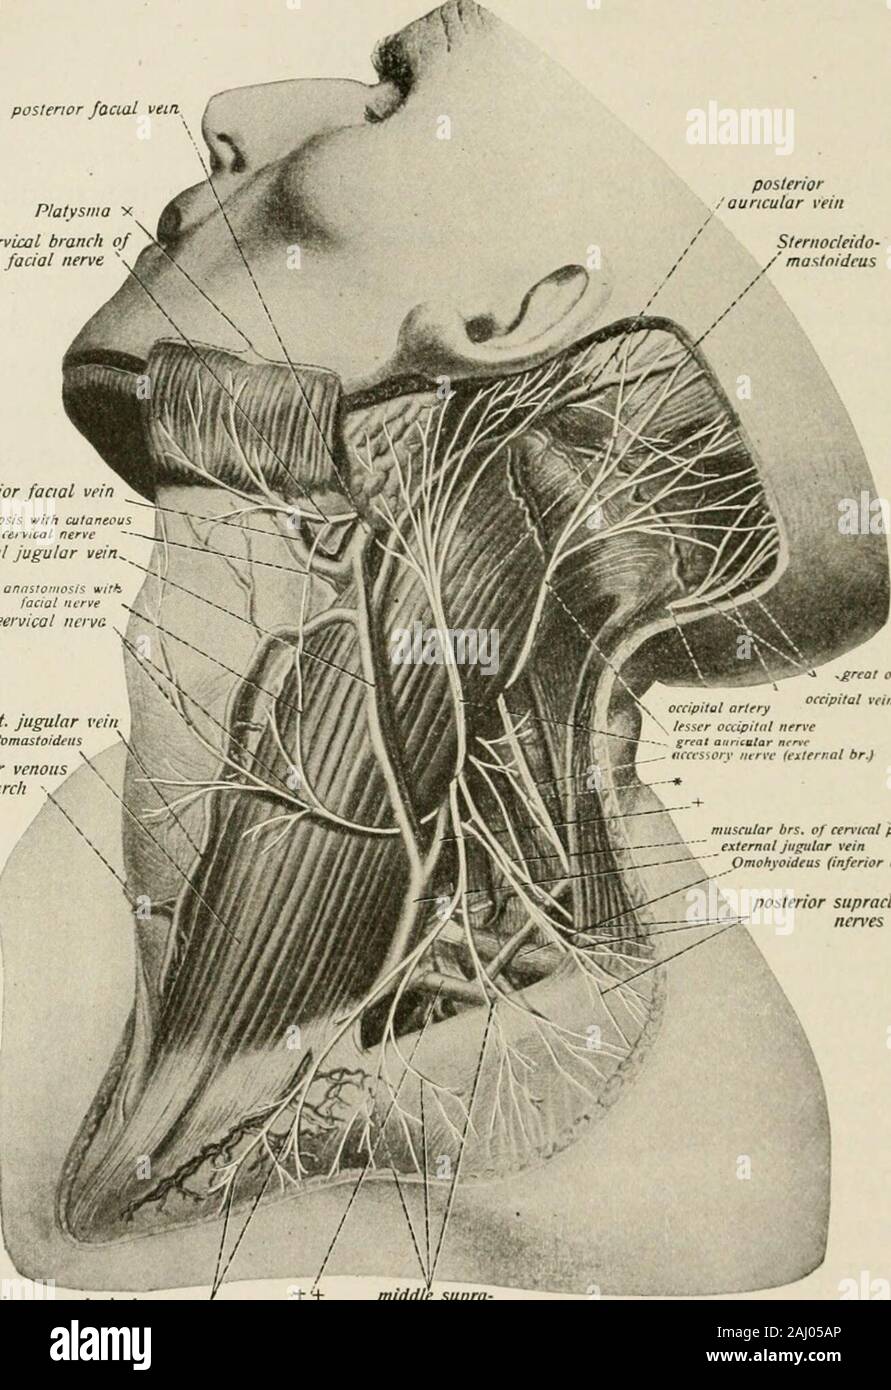 Local and regional anesthesia; with chapters on spinal, epidural, paravertebral, and parasacral analgesia, and other applications of local and regional anesthesia to the surgery of the eye, ear, nose and throat, and to dental practice . n the supraclavicular space, in which thesubclavian artery and brachial plexus are readily exposed for opera-tive purposes (Matas). Nerves of the Neck.—In the neck the only opportunity for theappHcation of regional methods of anesthesia, aside from paraverte-bral methods, is the superficial branches of the cervical plexus as theyemerge around the posterior bord Stock Photo